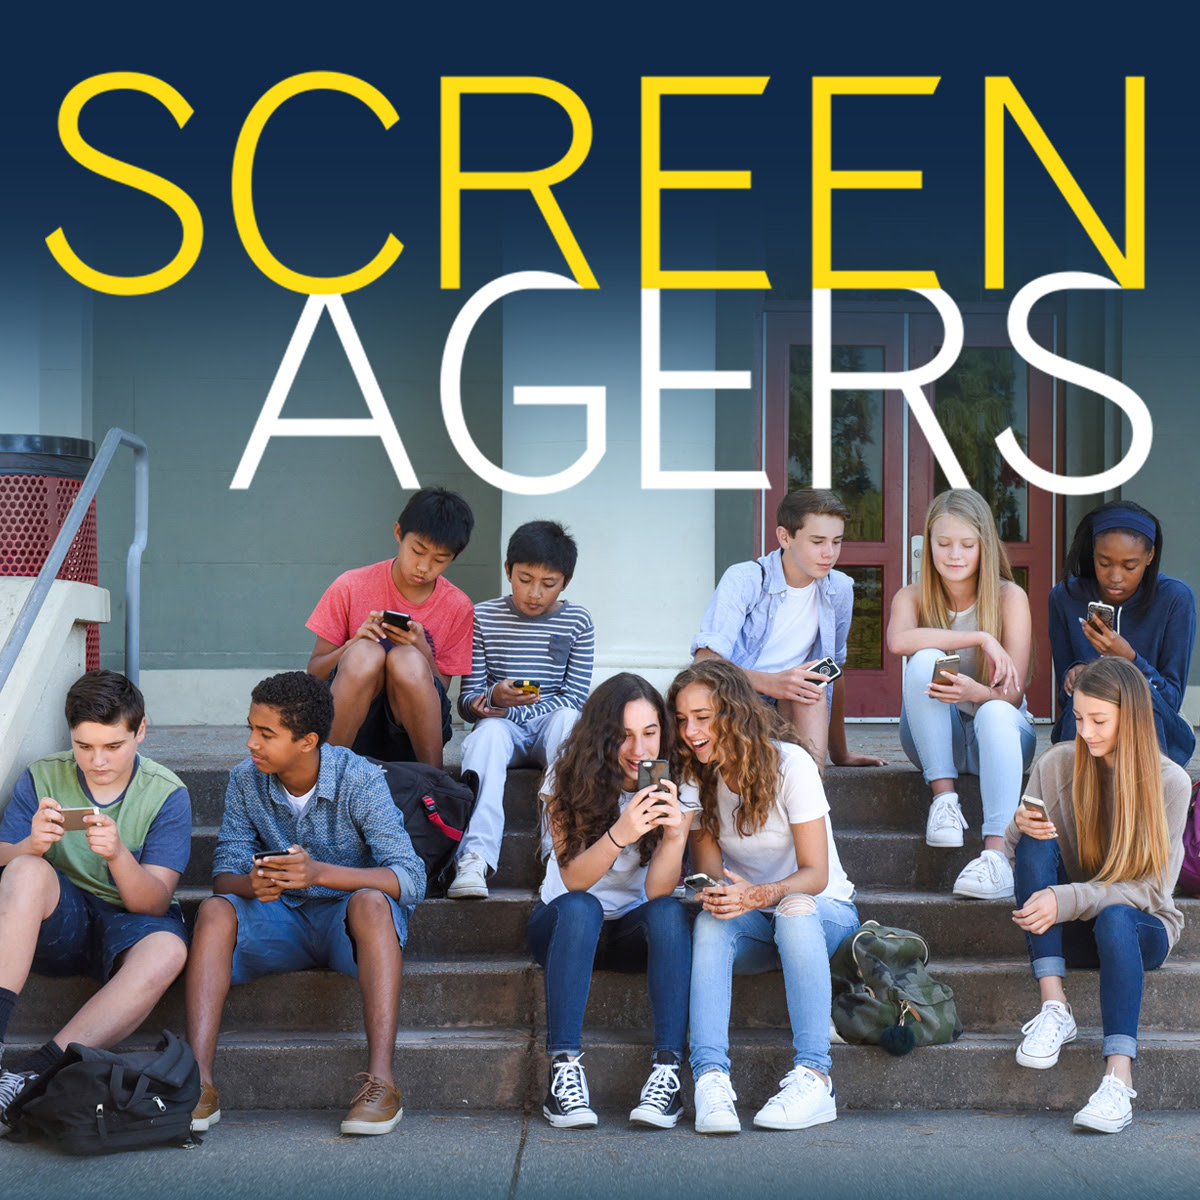 Screenagers Film Presented By Brookings Human Rights Commission